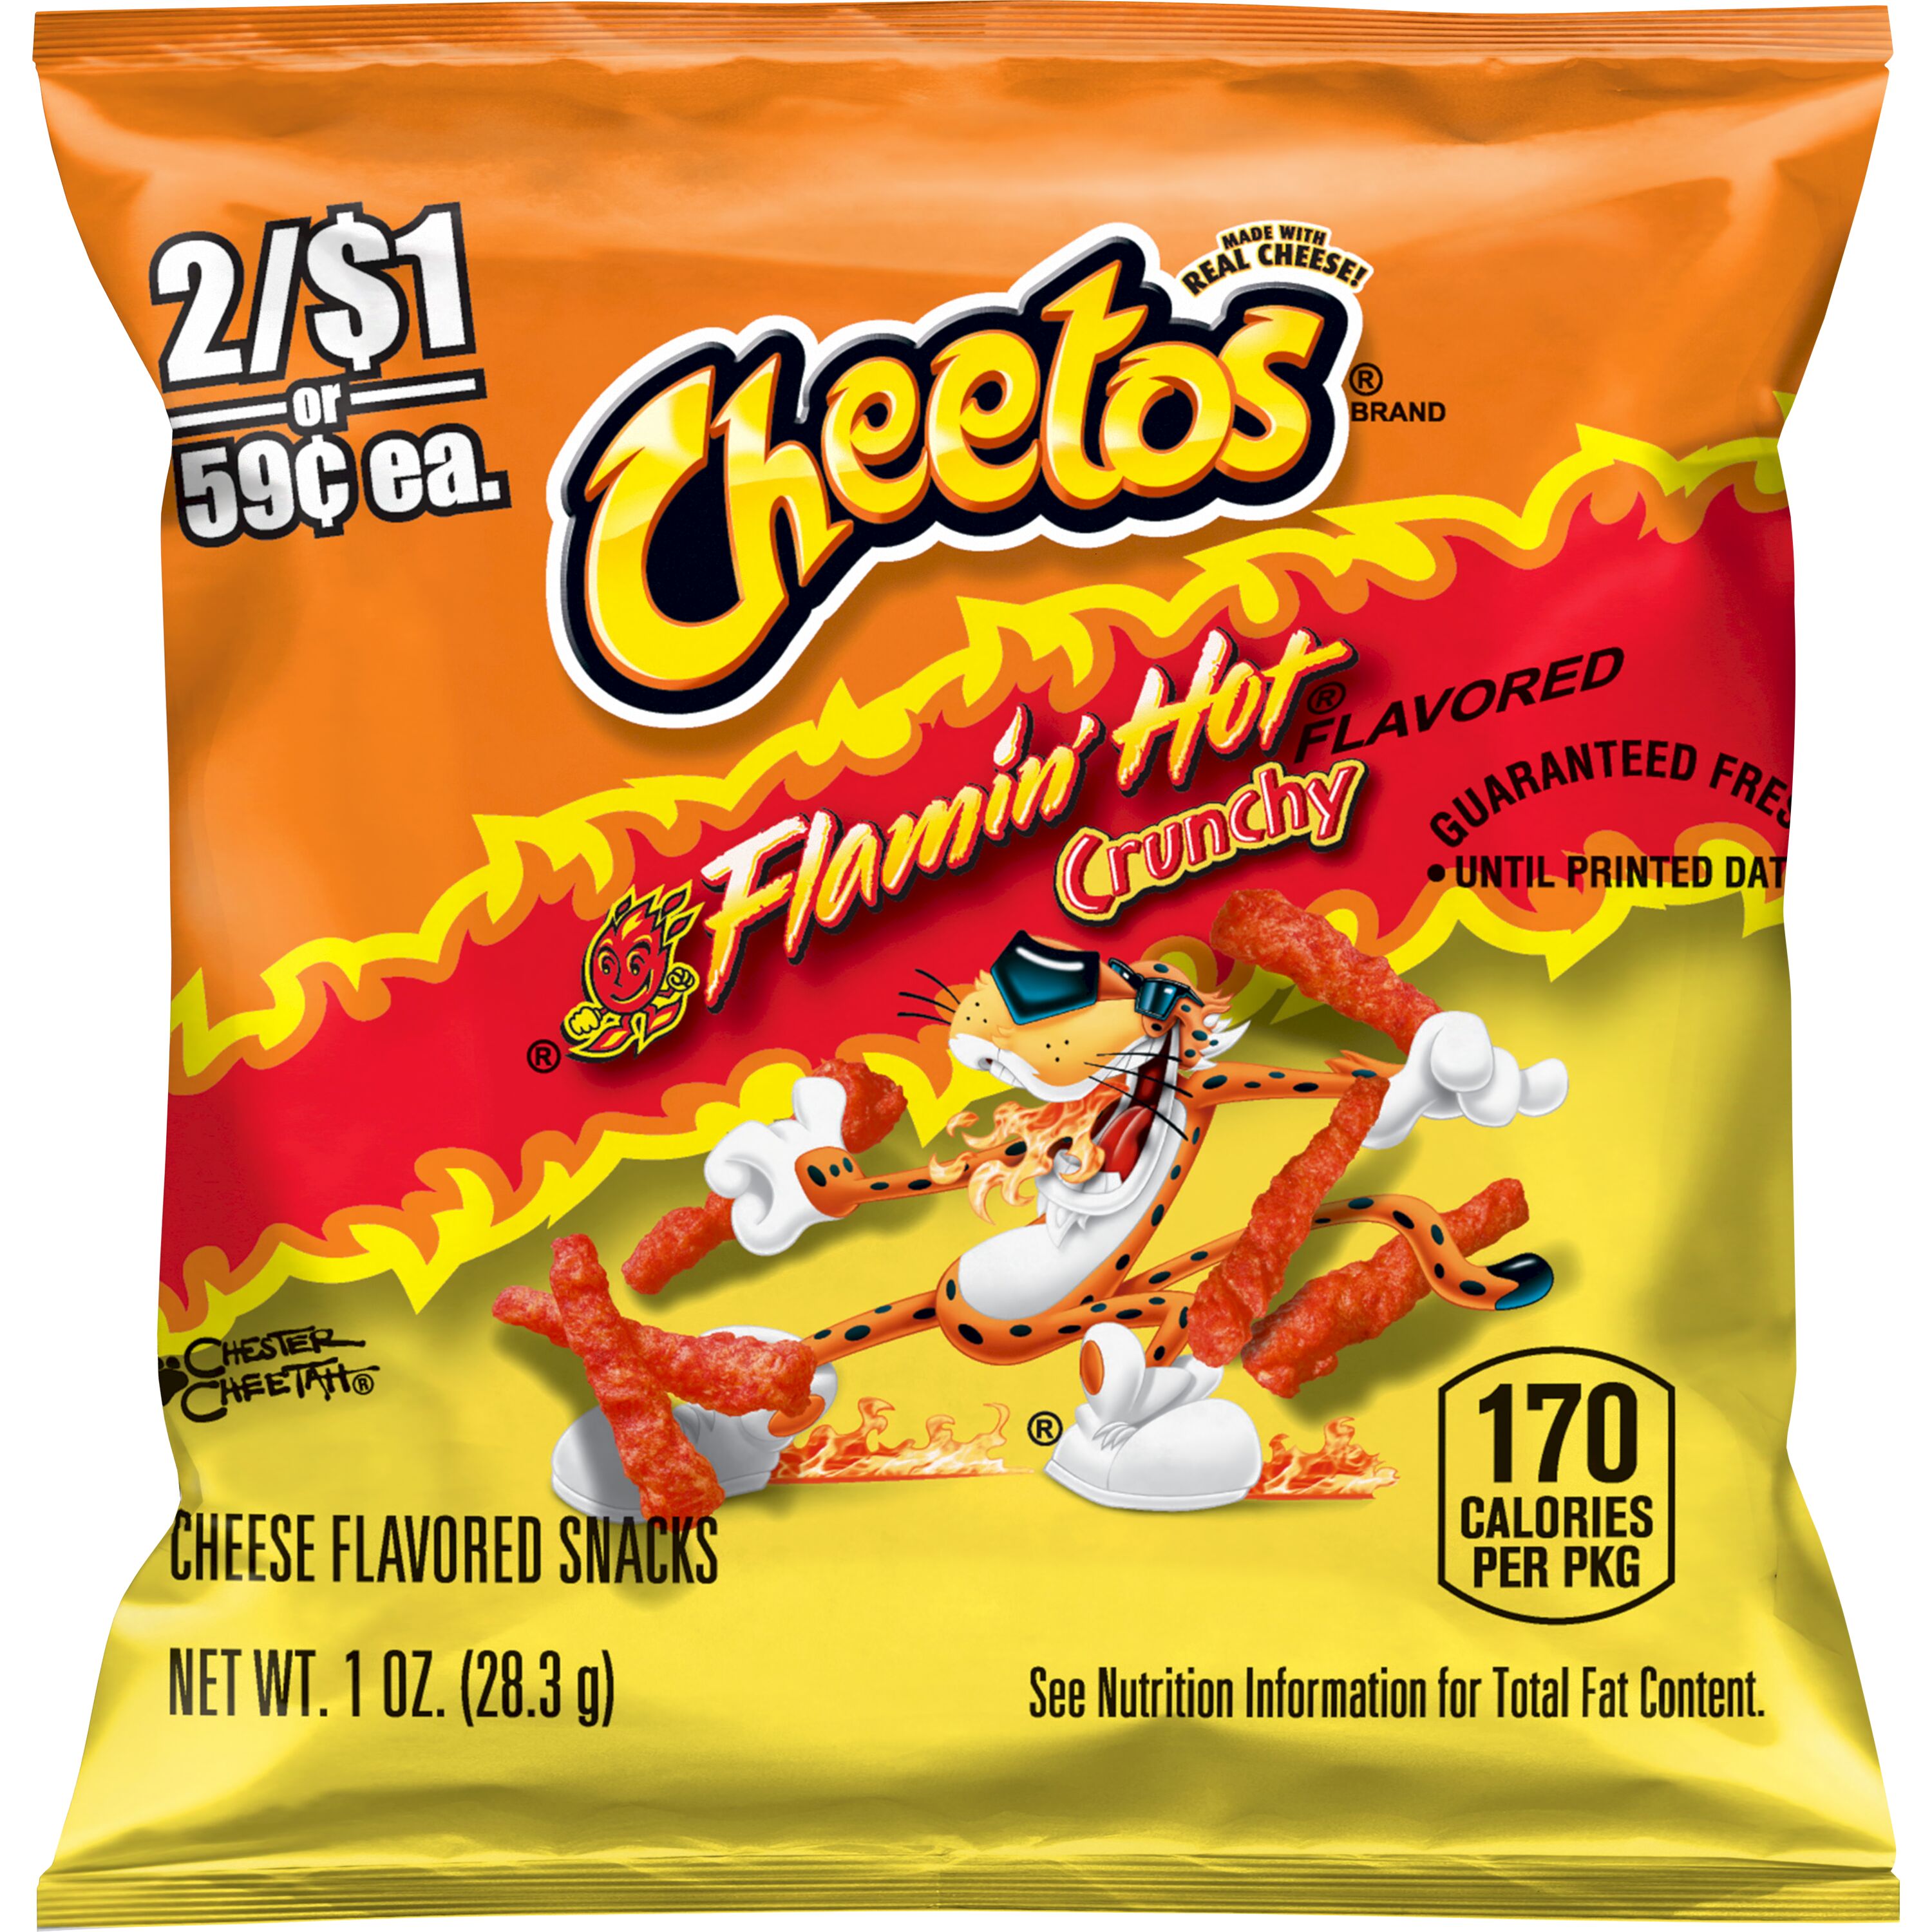 Cheetos, Crunchy, Flamin' Hot Flavored, Cheese Flavored Snacks